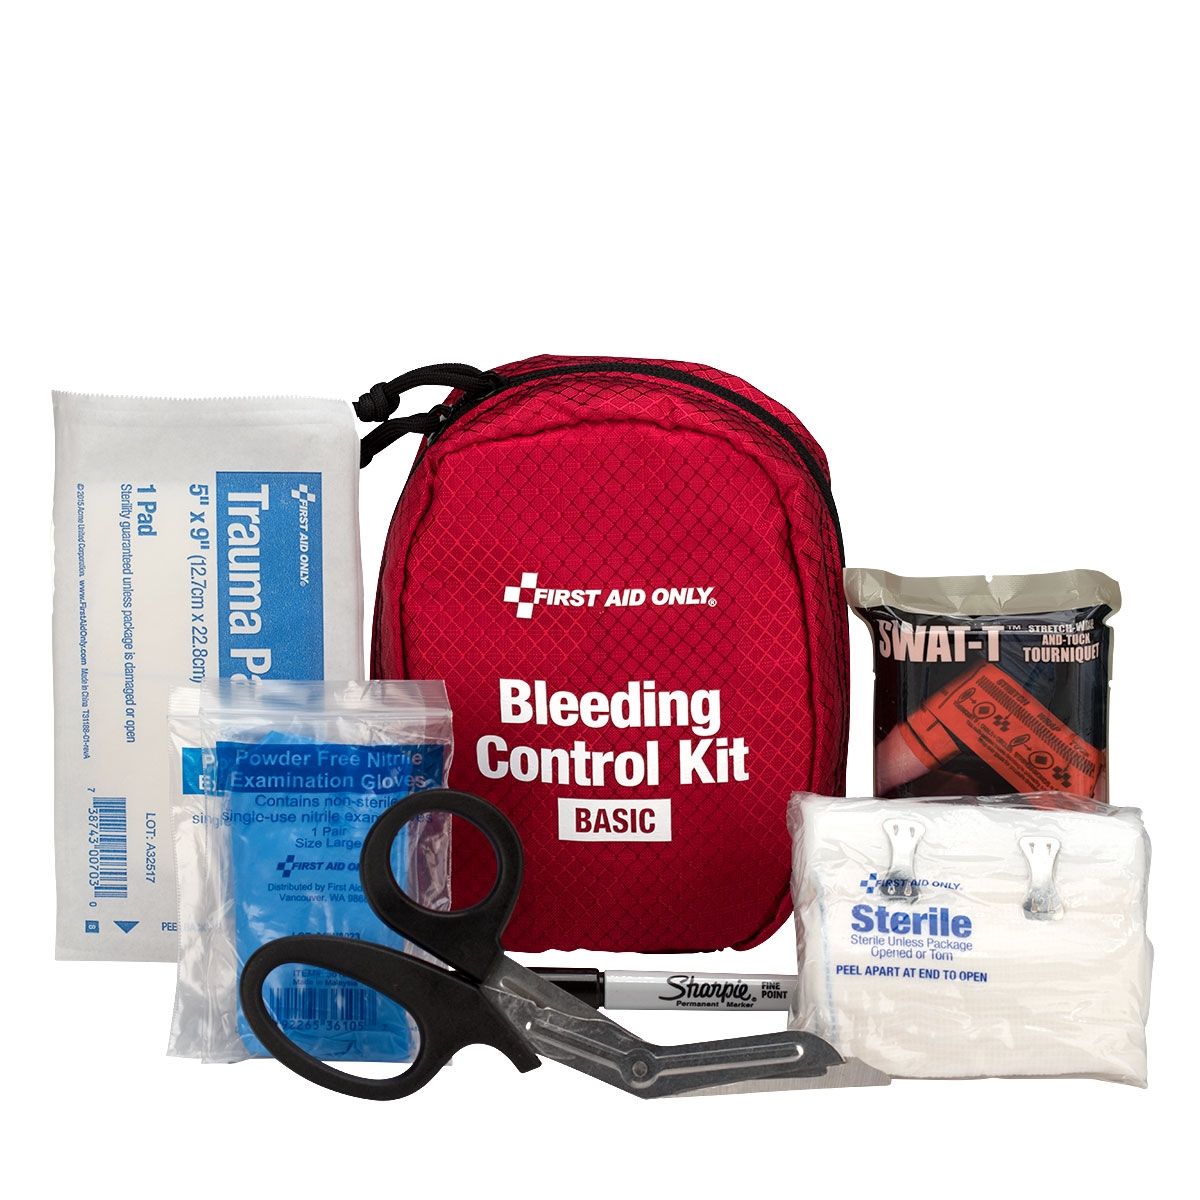 First Aid Only Bleeding Control Kit, Basic 91061